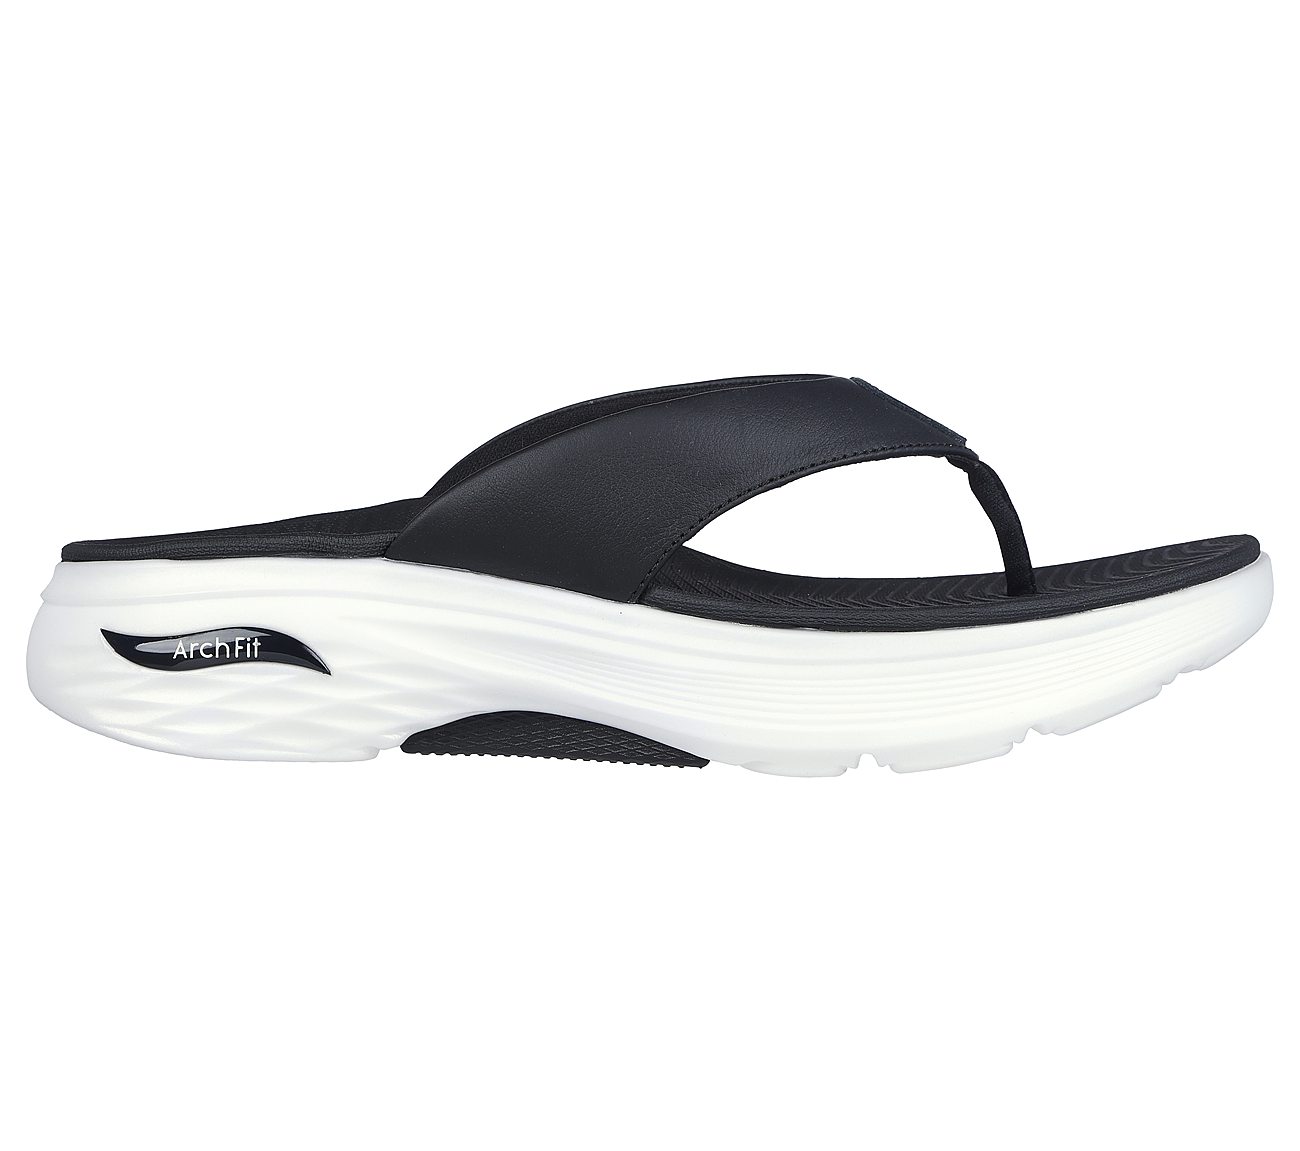 MAX CUSHIONING ARCH FIT PRIME, BLACK/WHITE Footwear Lateral View